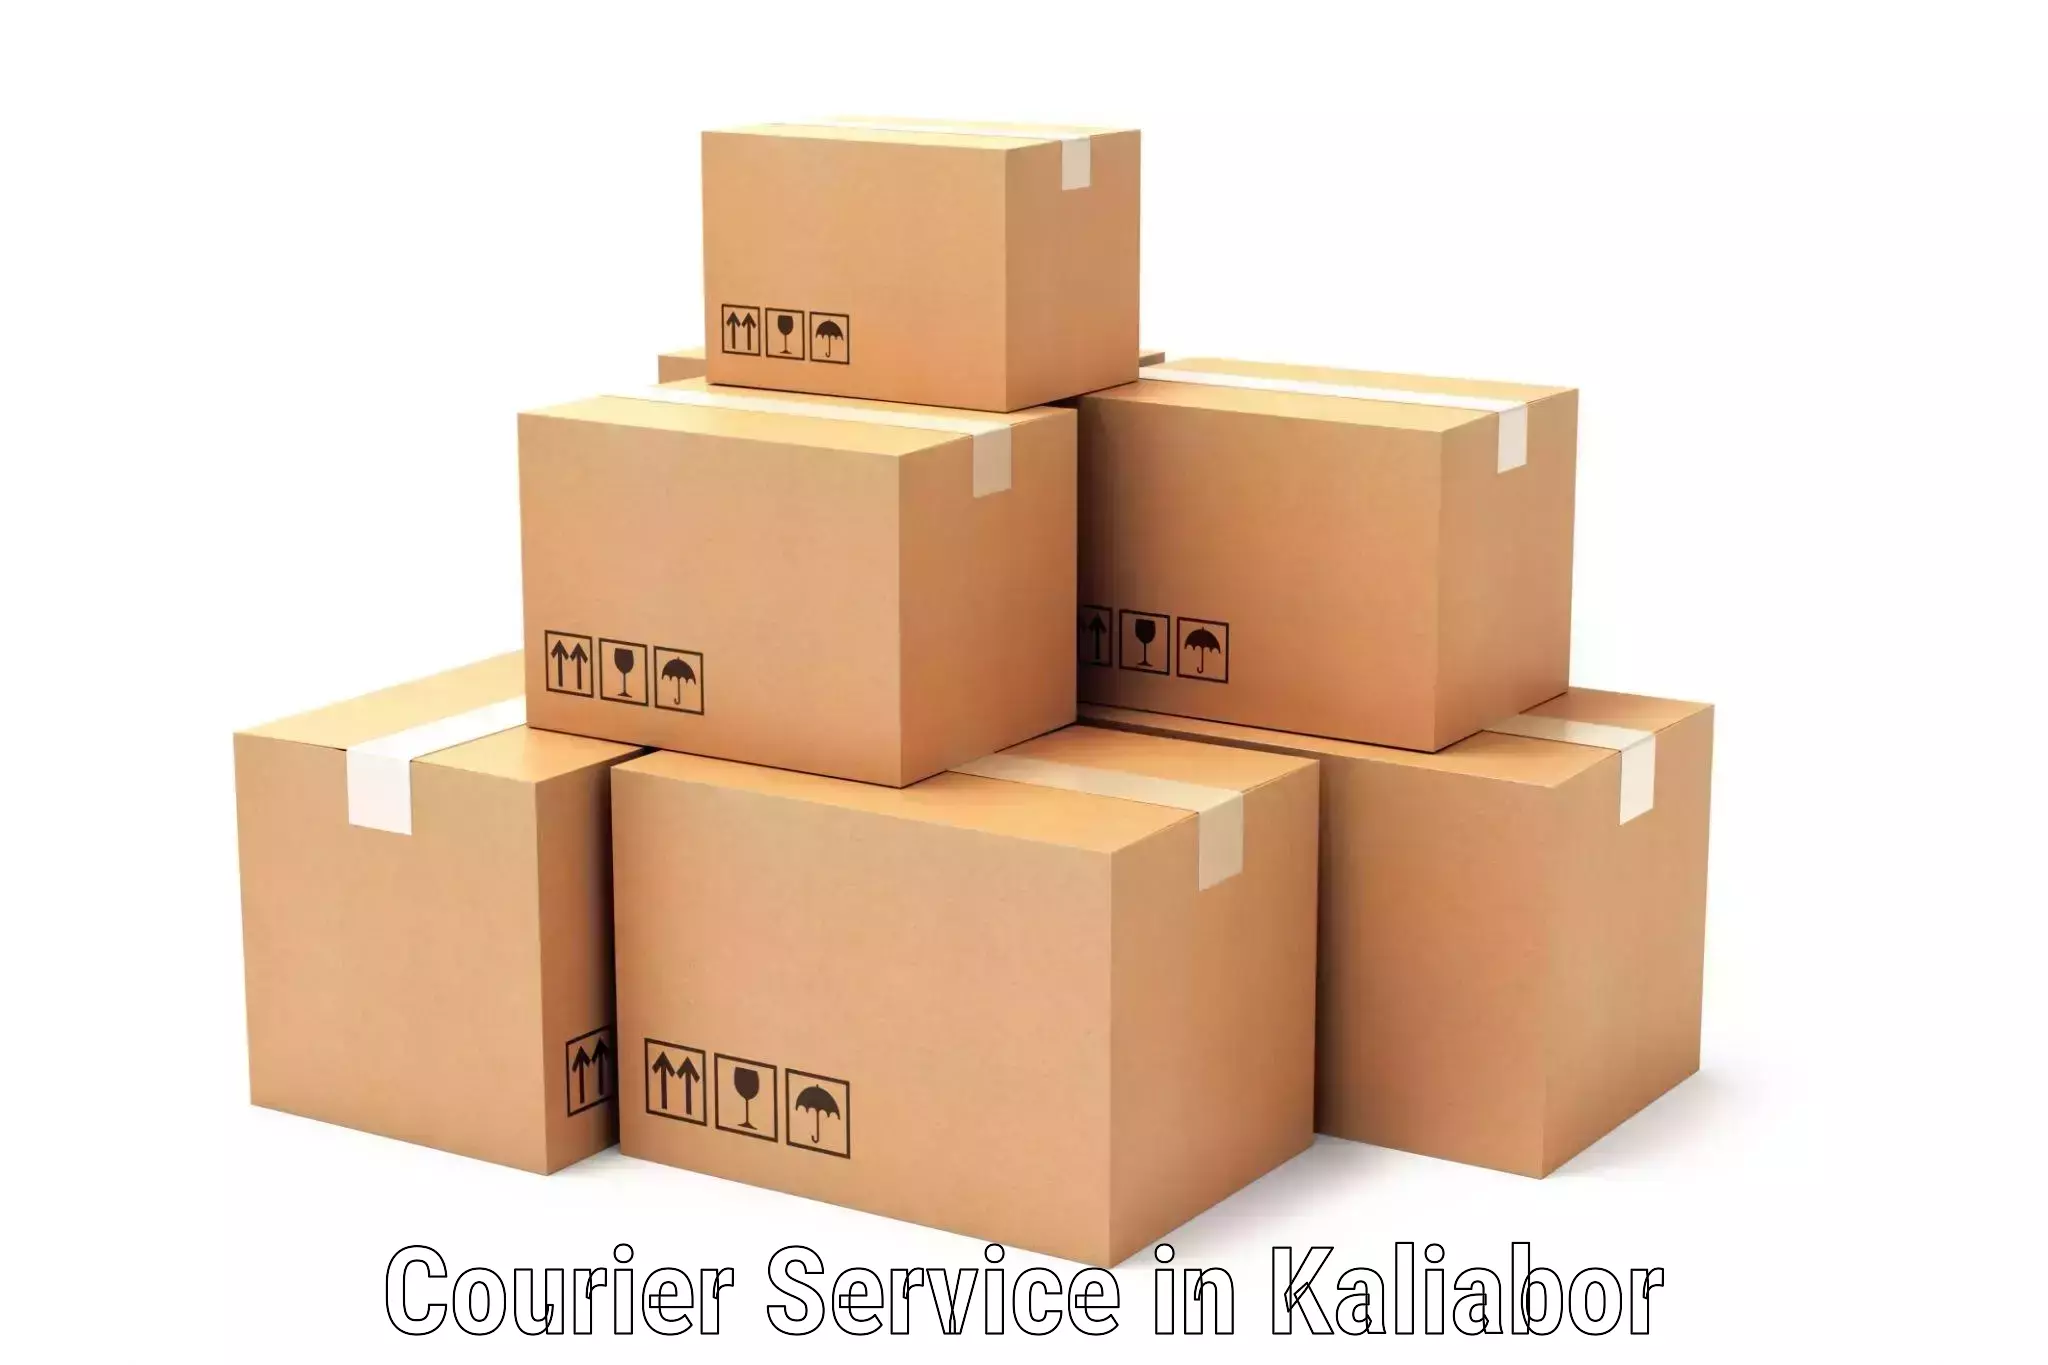 Efficient package consolidation in Kaliabor